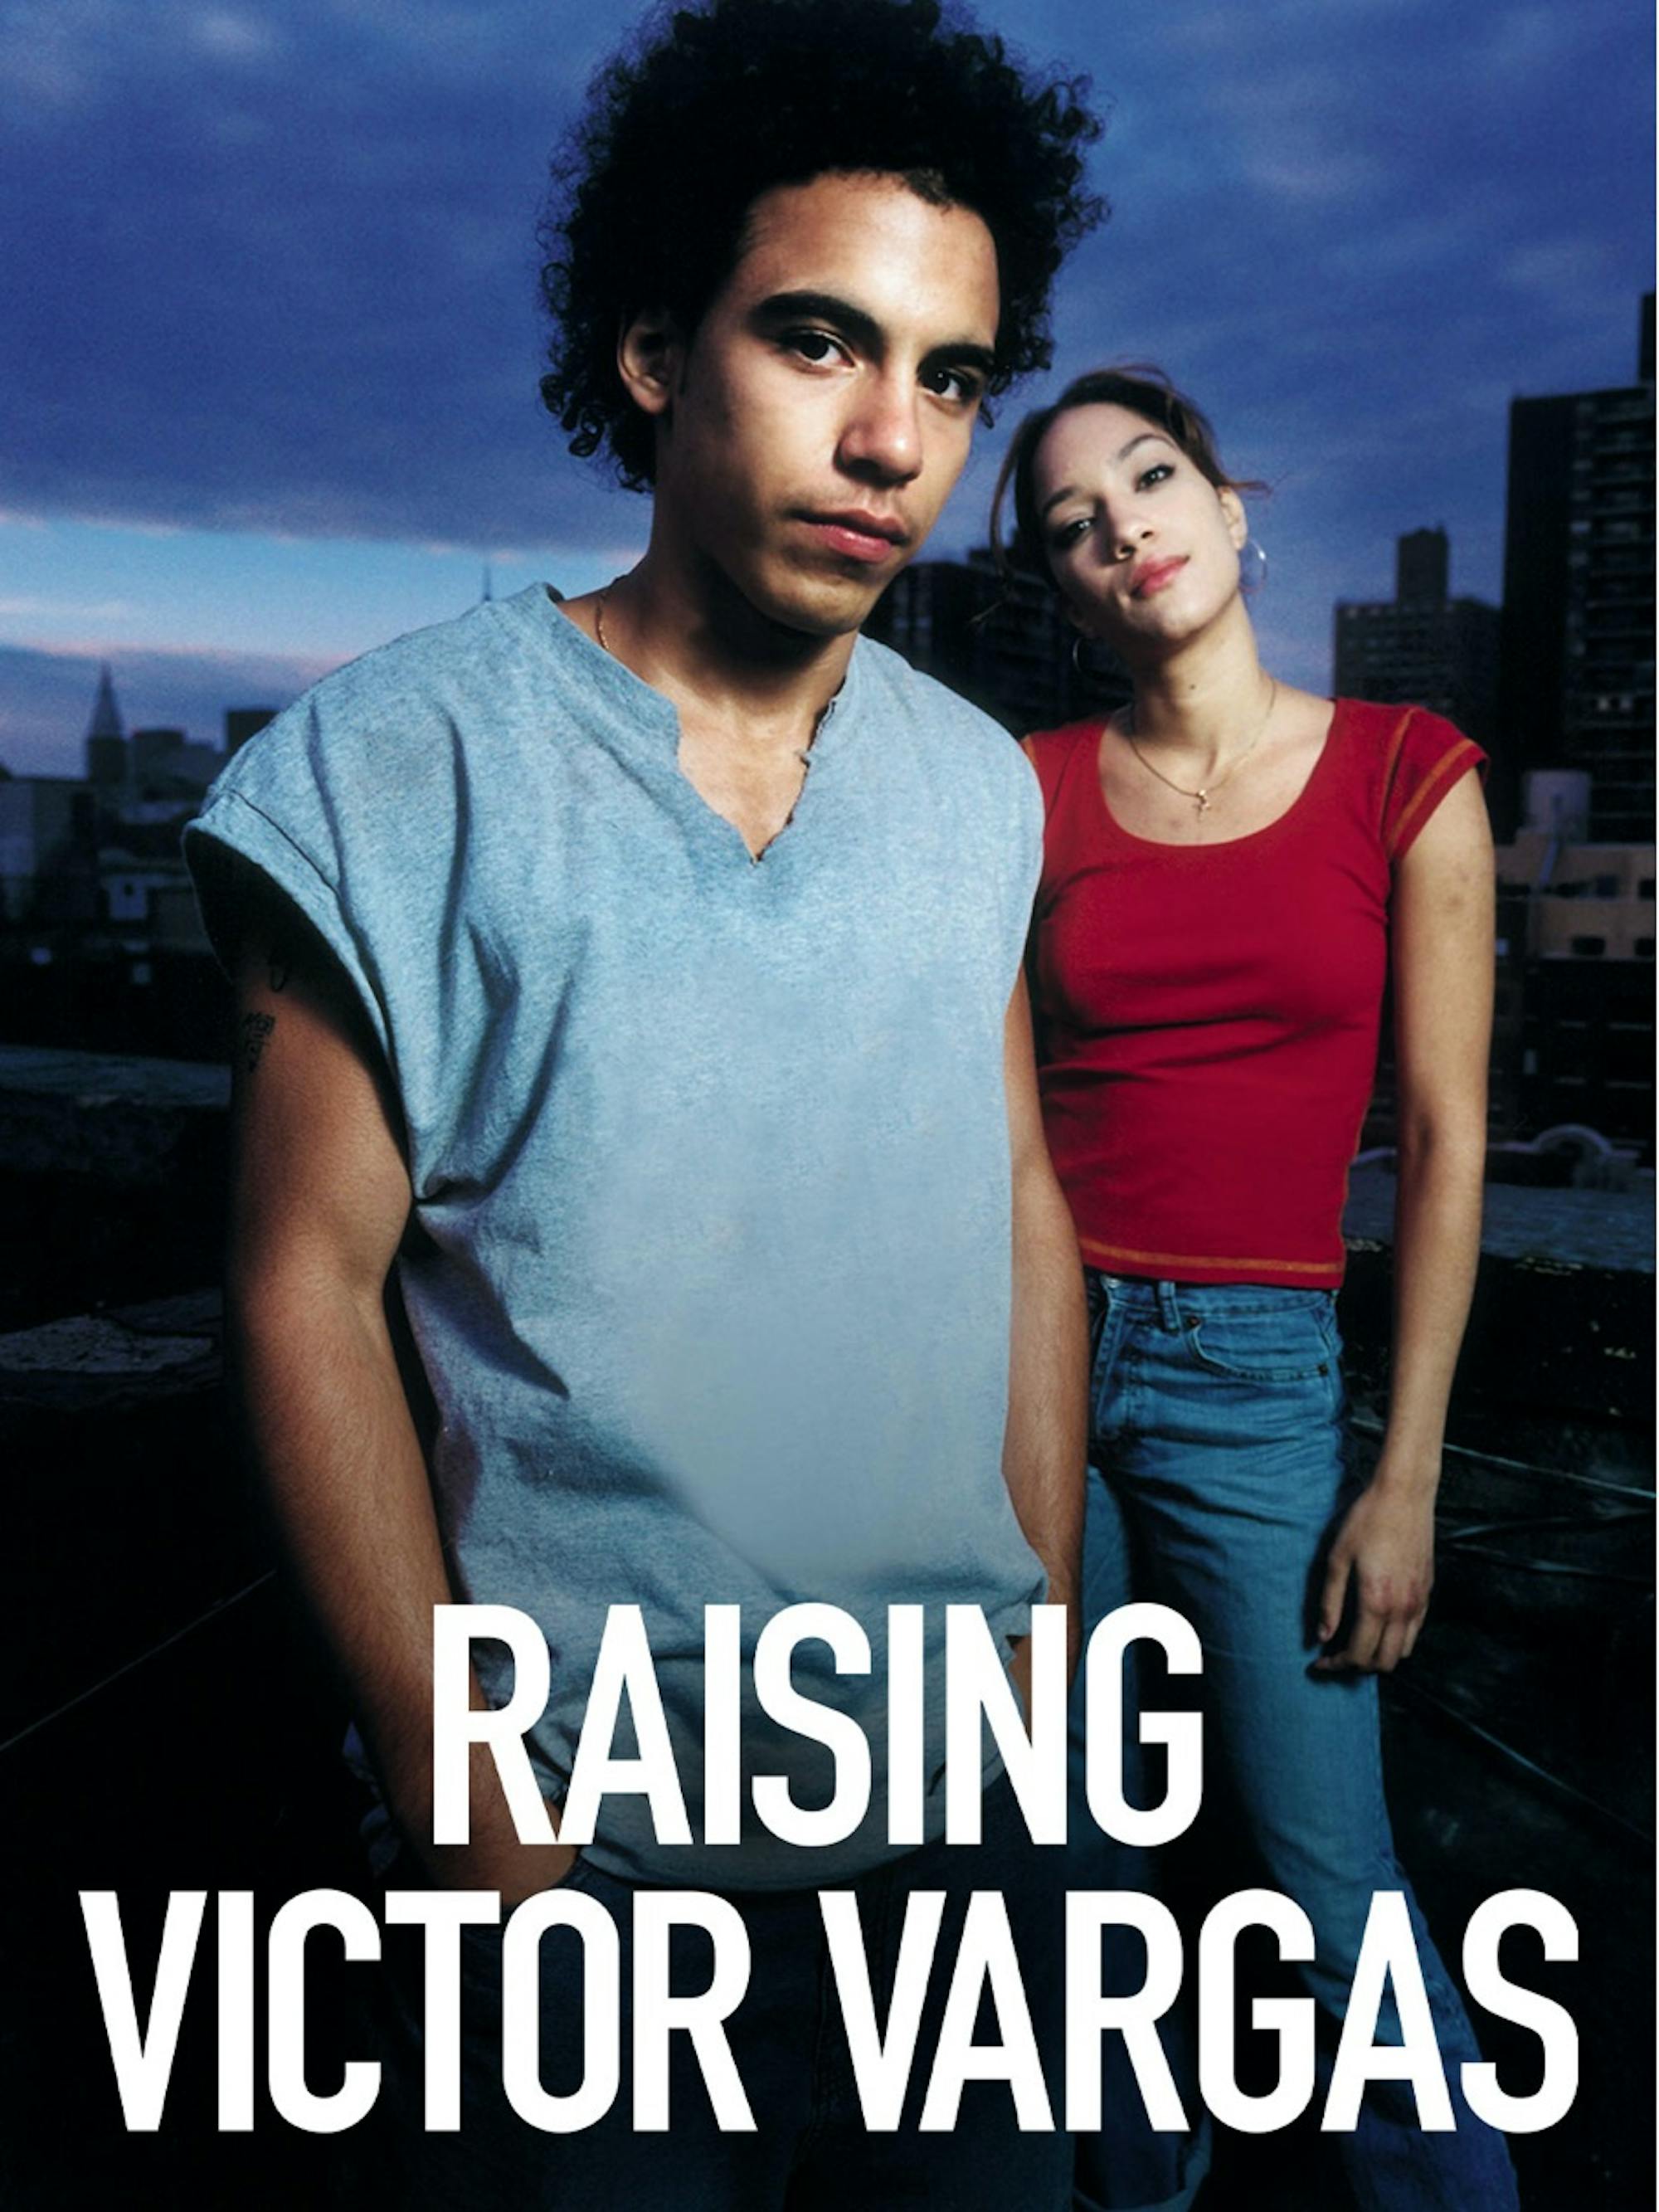 A poster for Raising Victor Vargas. Victor Rasuk wears a blue tank top. The woman behind him wears a red shirt and jeans. The sky is dark and stormy, and they seem to be standing on a roof.